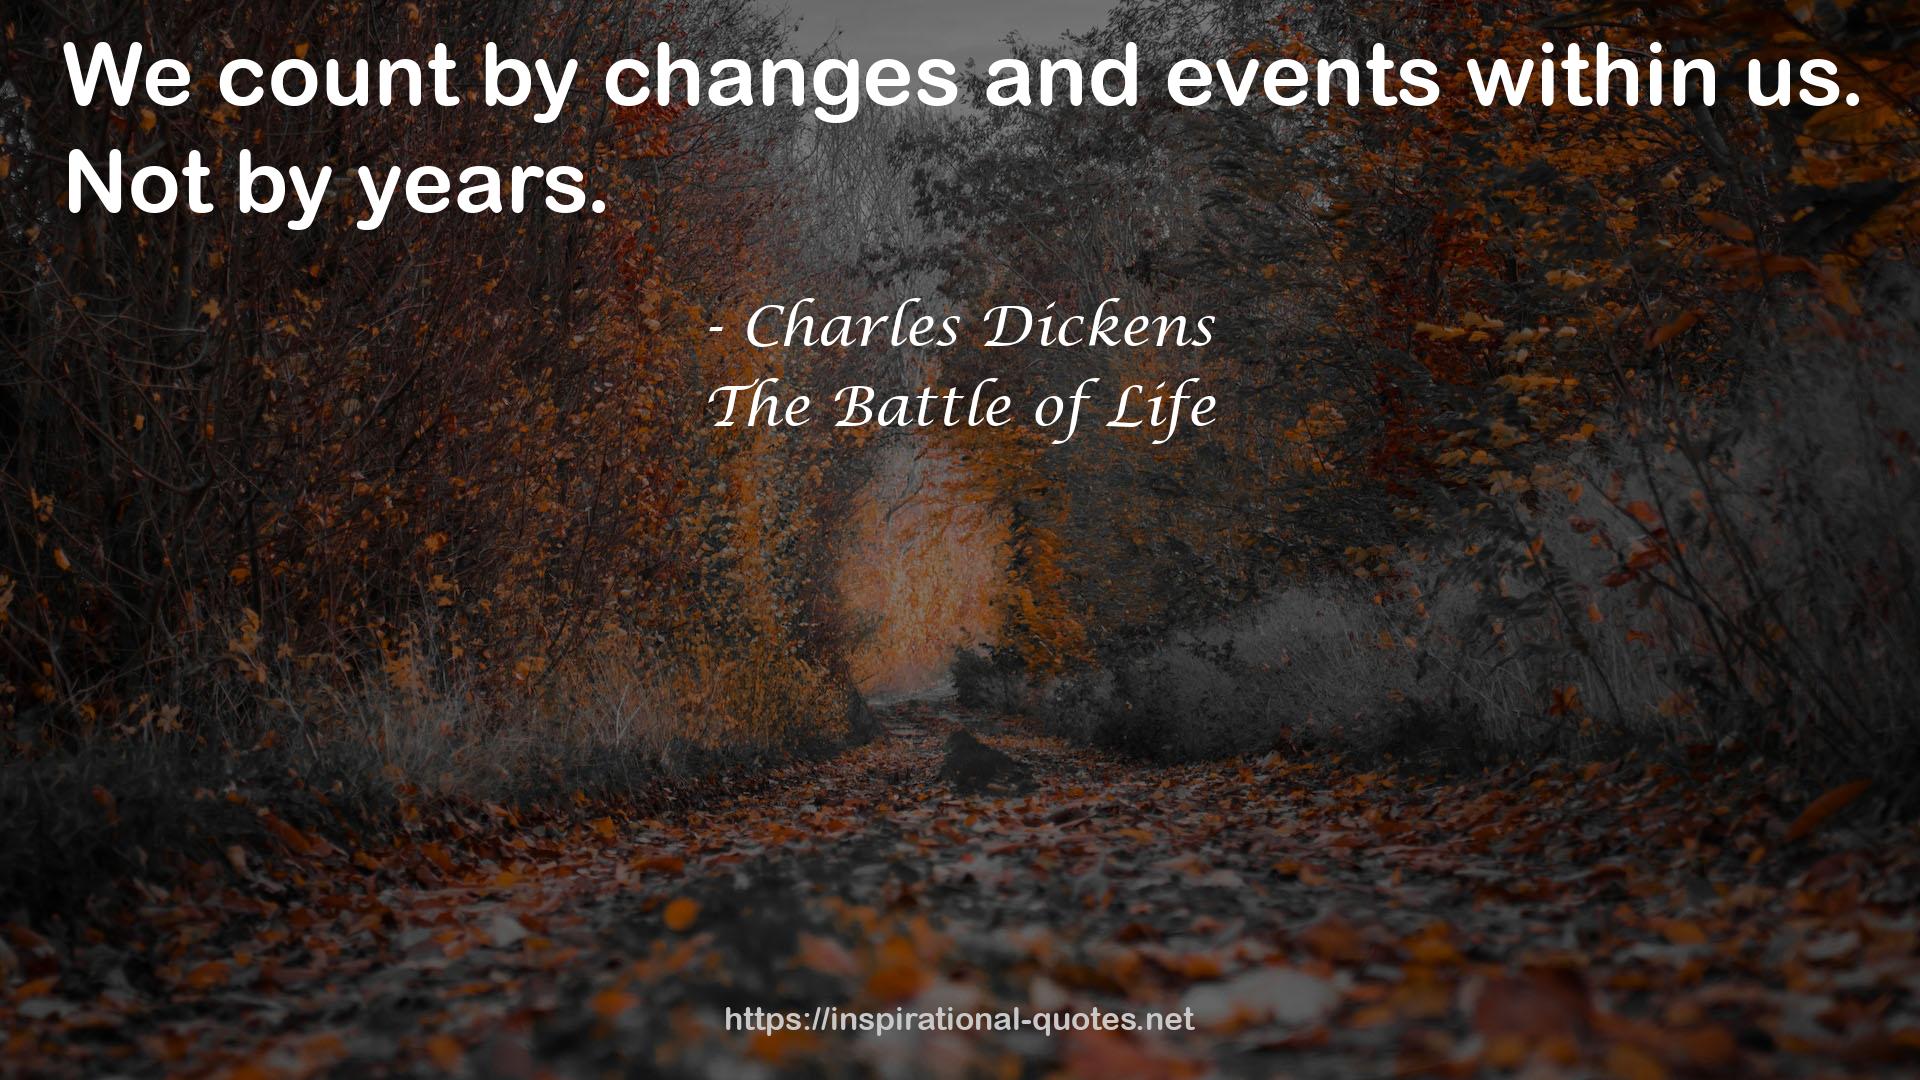 The Battle of Life QUOTES